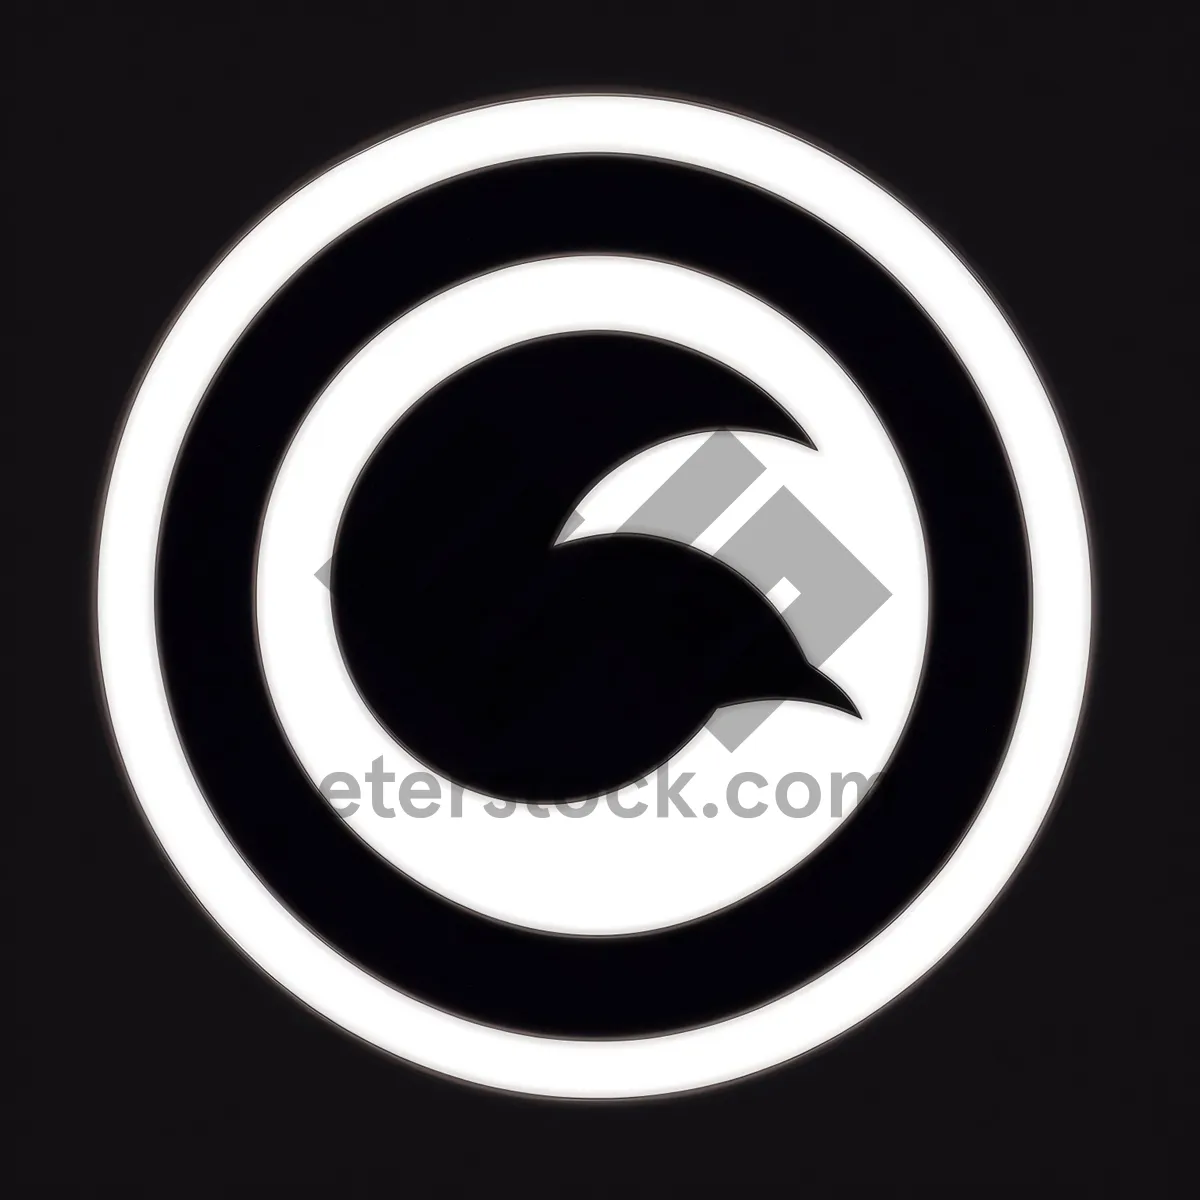 Picture of Modern Black Round 3D Web Icon